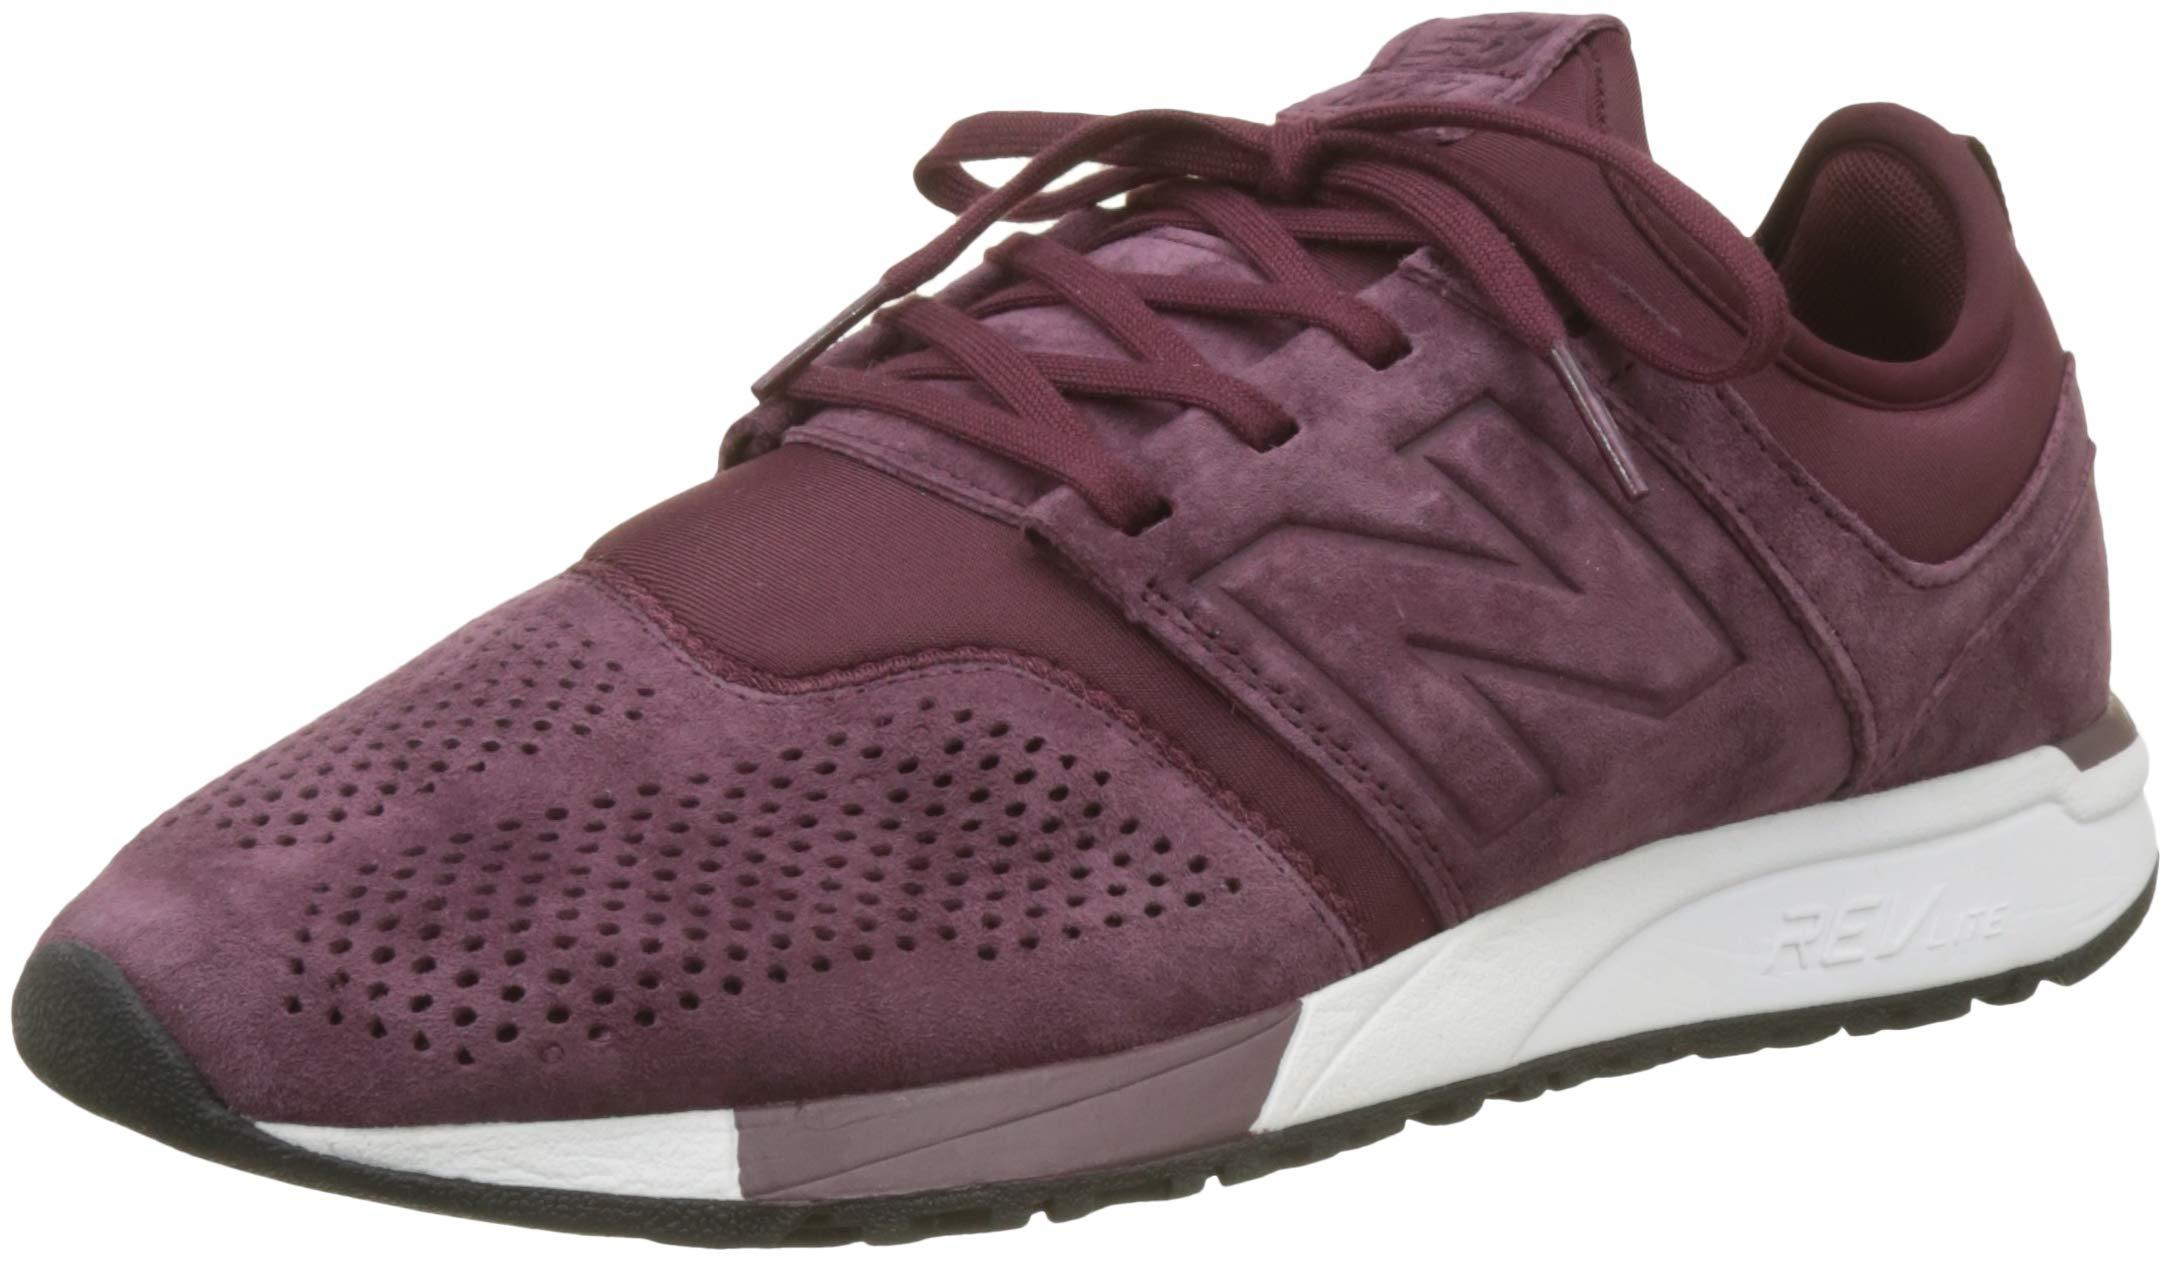 New Balance Leather 247 V1 Sneaker in Burgundy (Purple) for Men - Save 77%  | Lyst